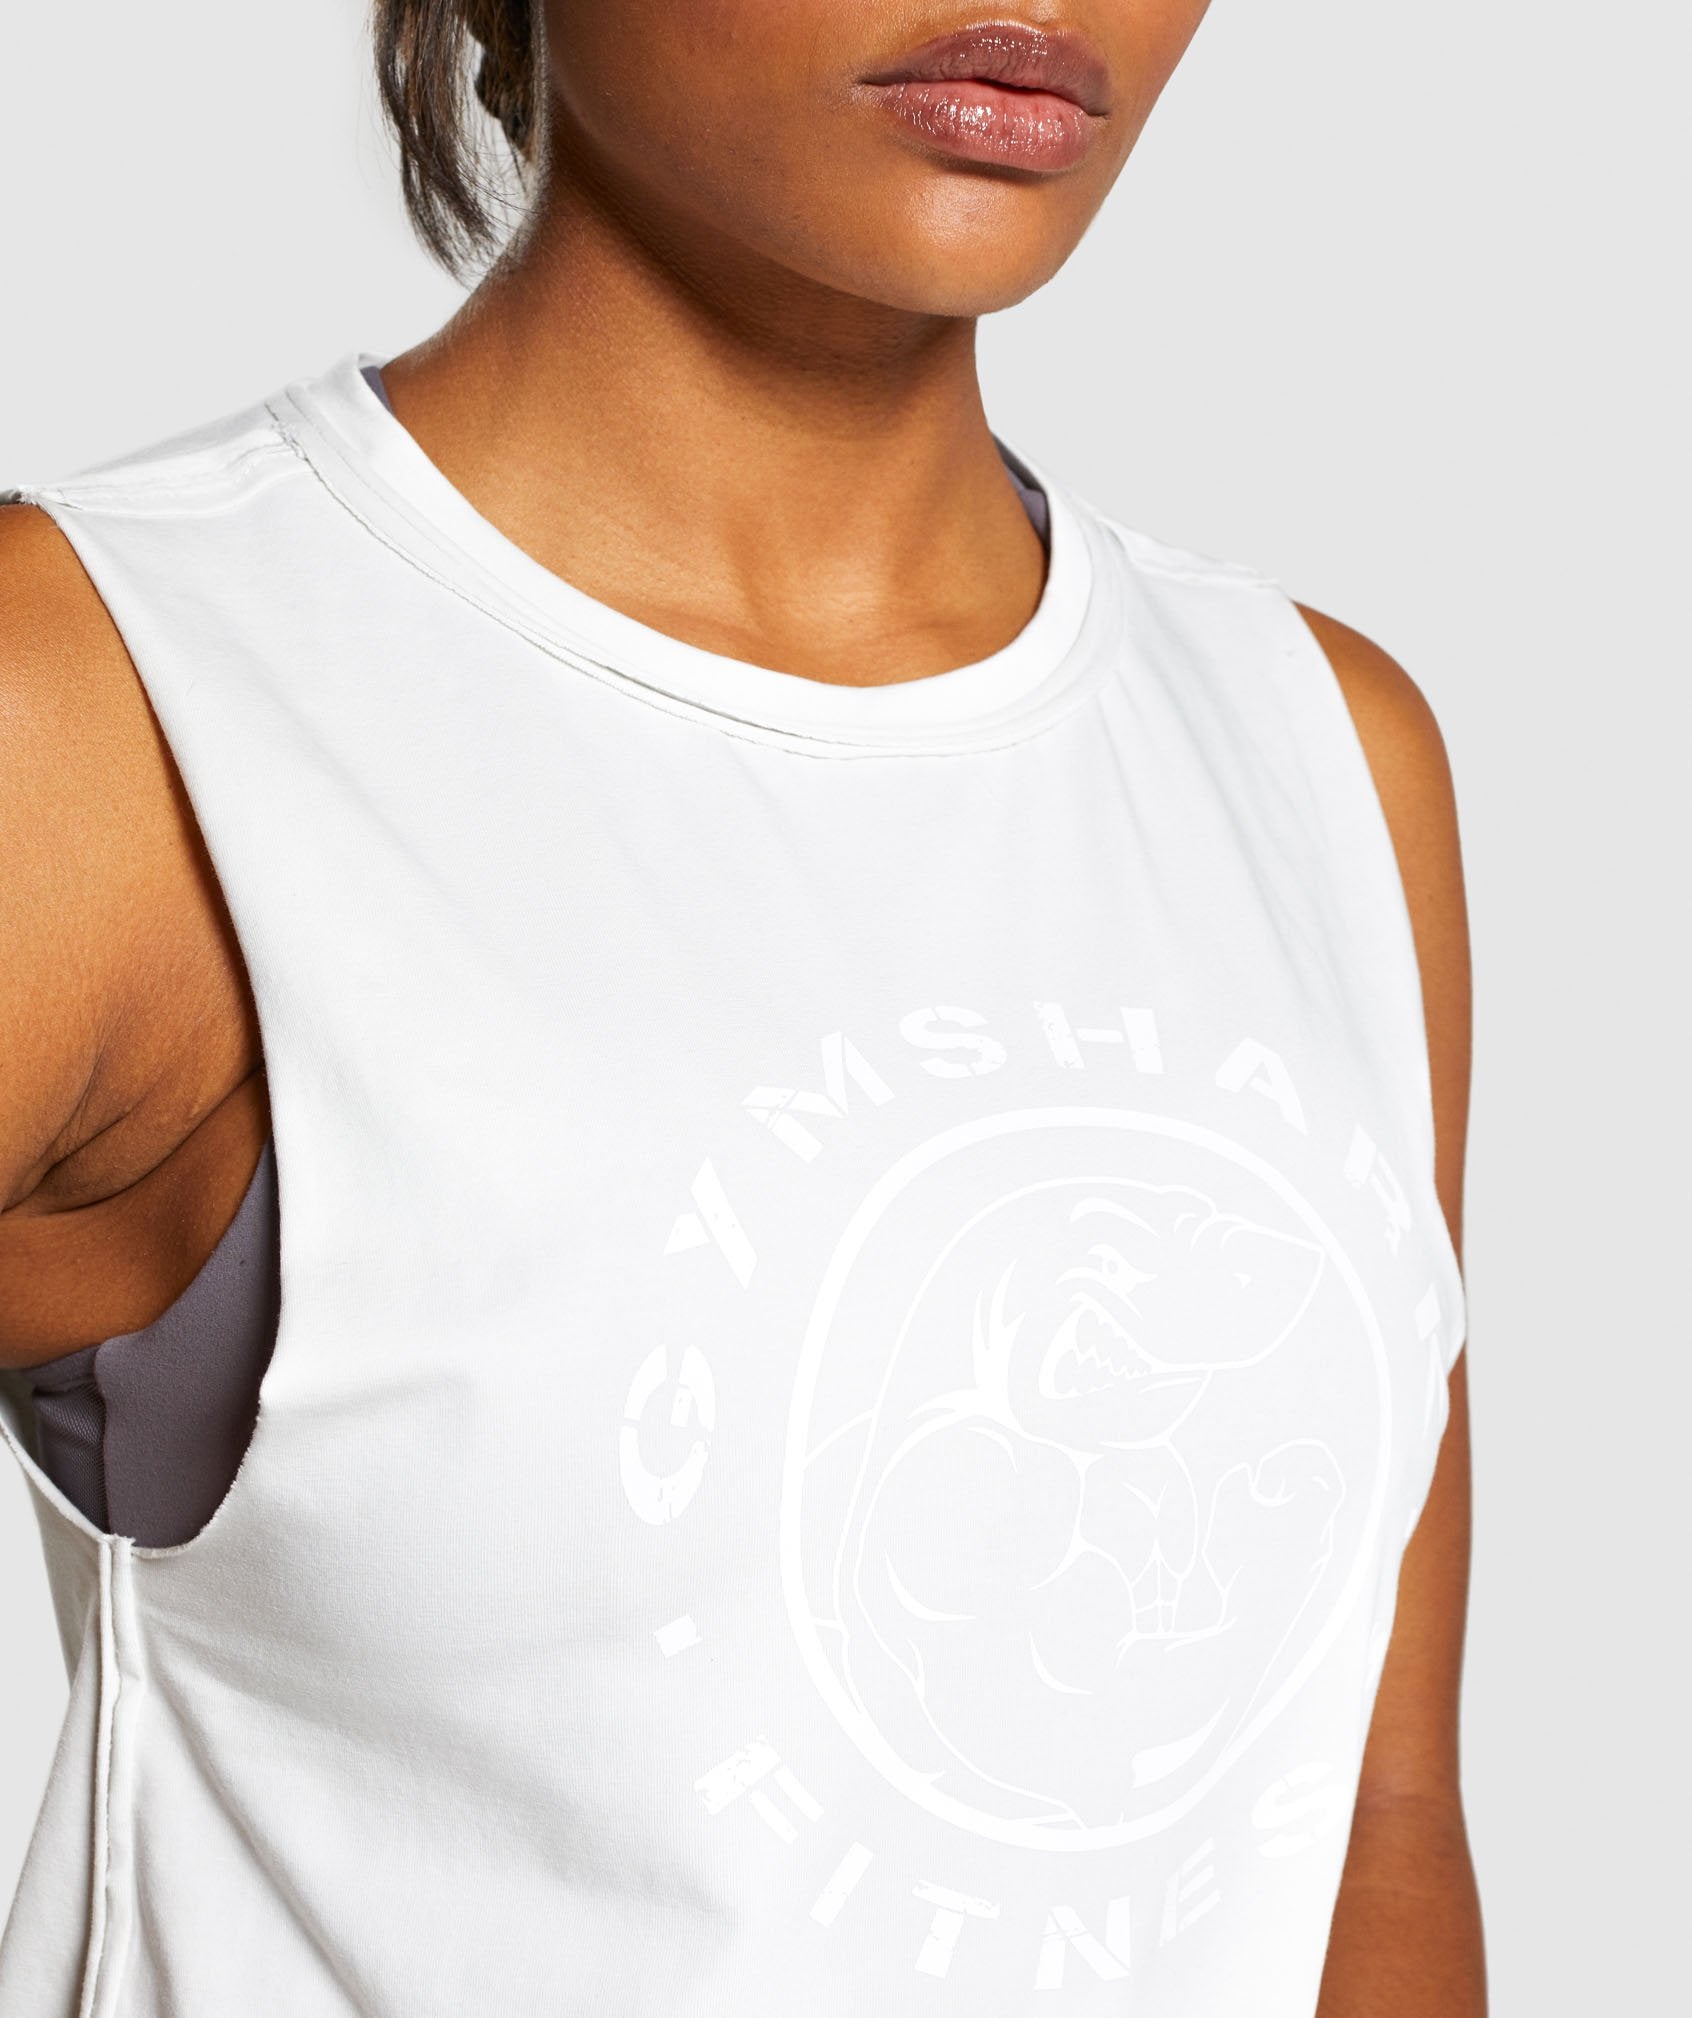 Legacy Fitness Tank in Light Grey - view 5